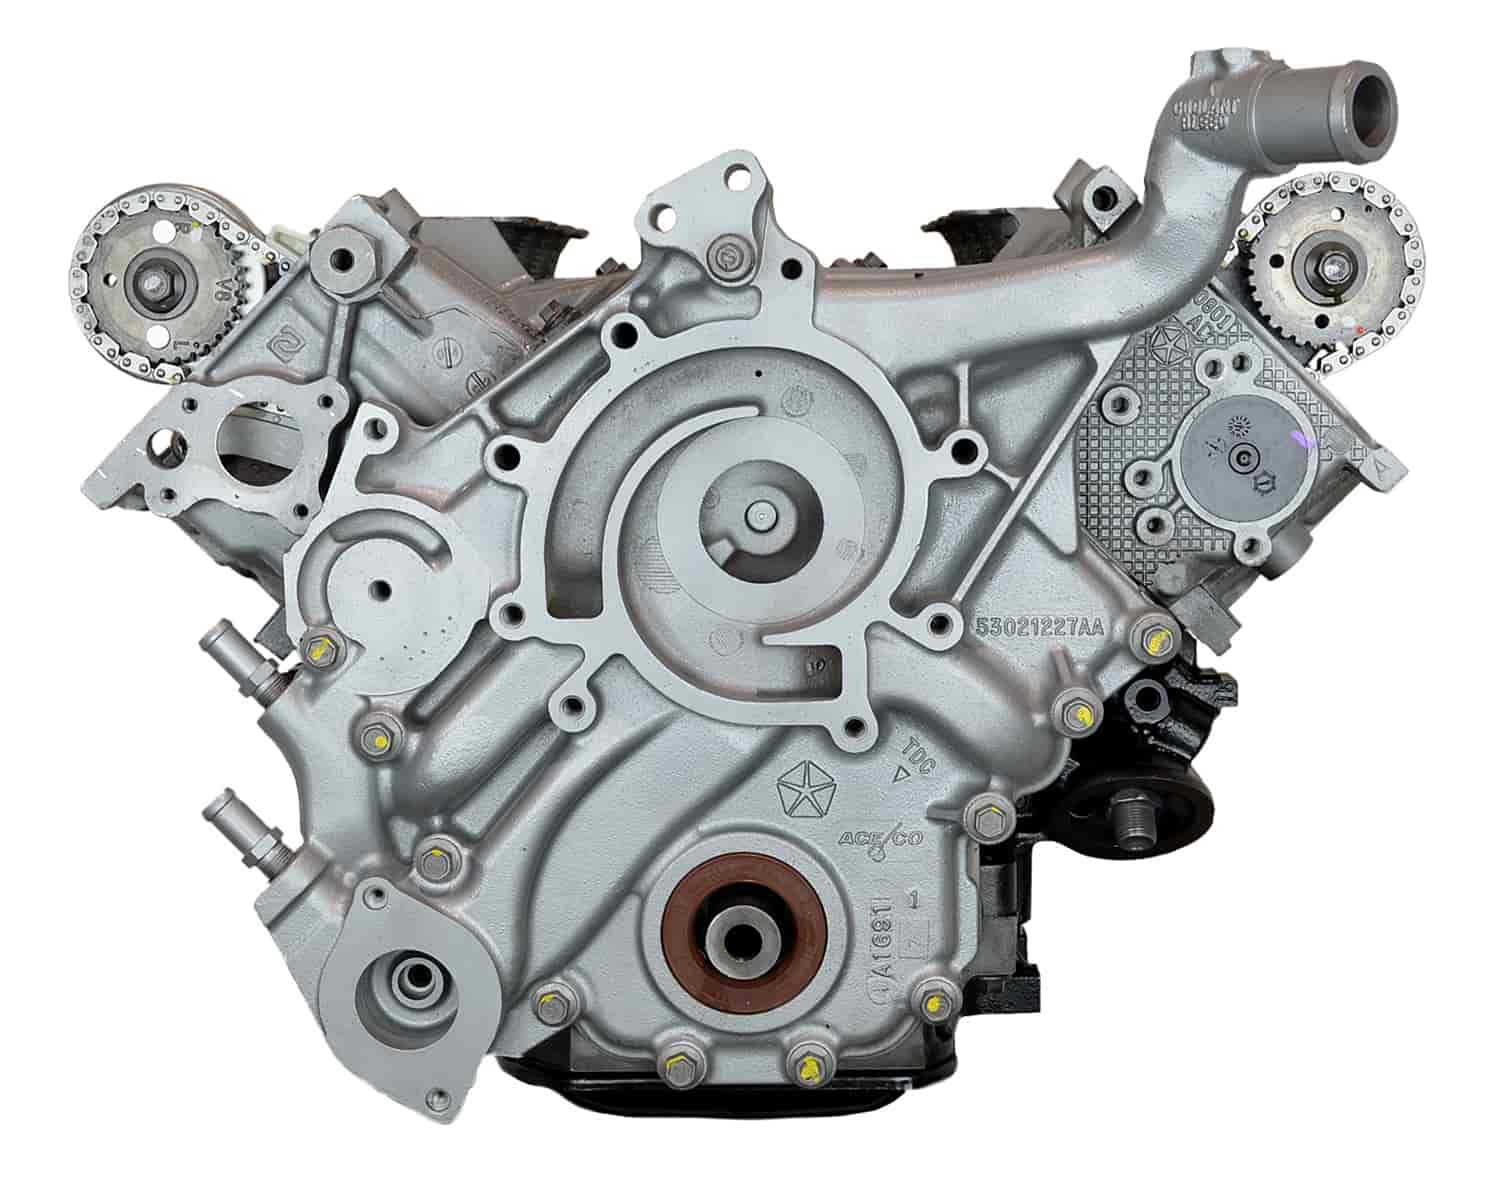 Remanufactured Crate Engine for 2002-2004 Dodge Ram Truck